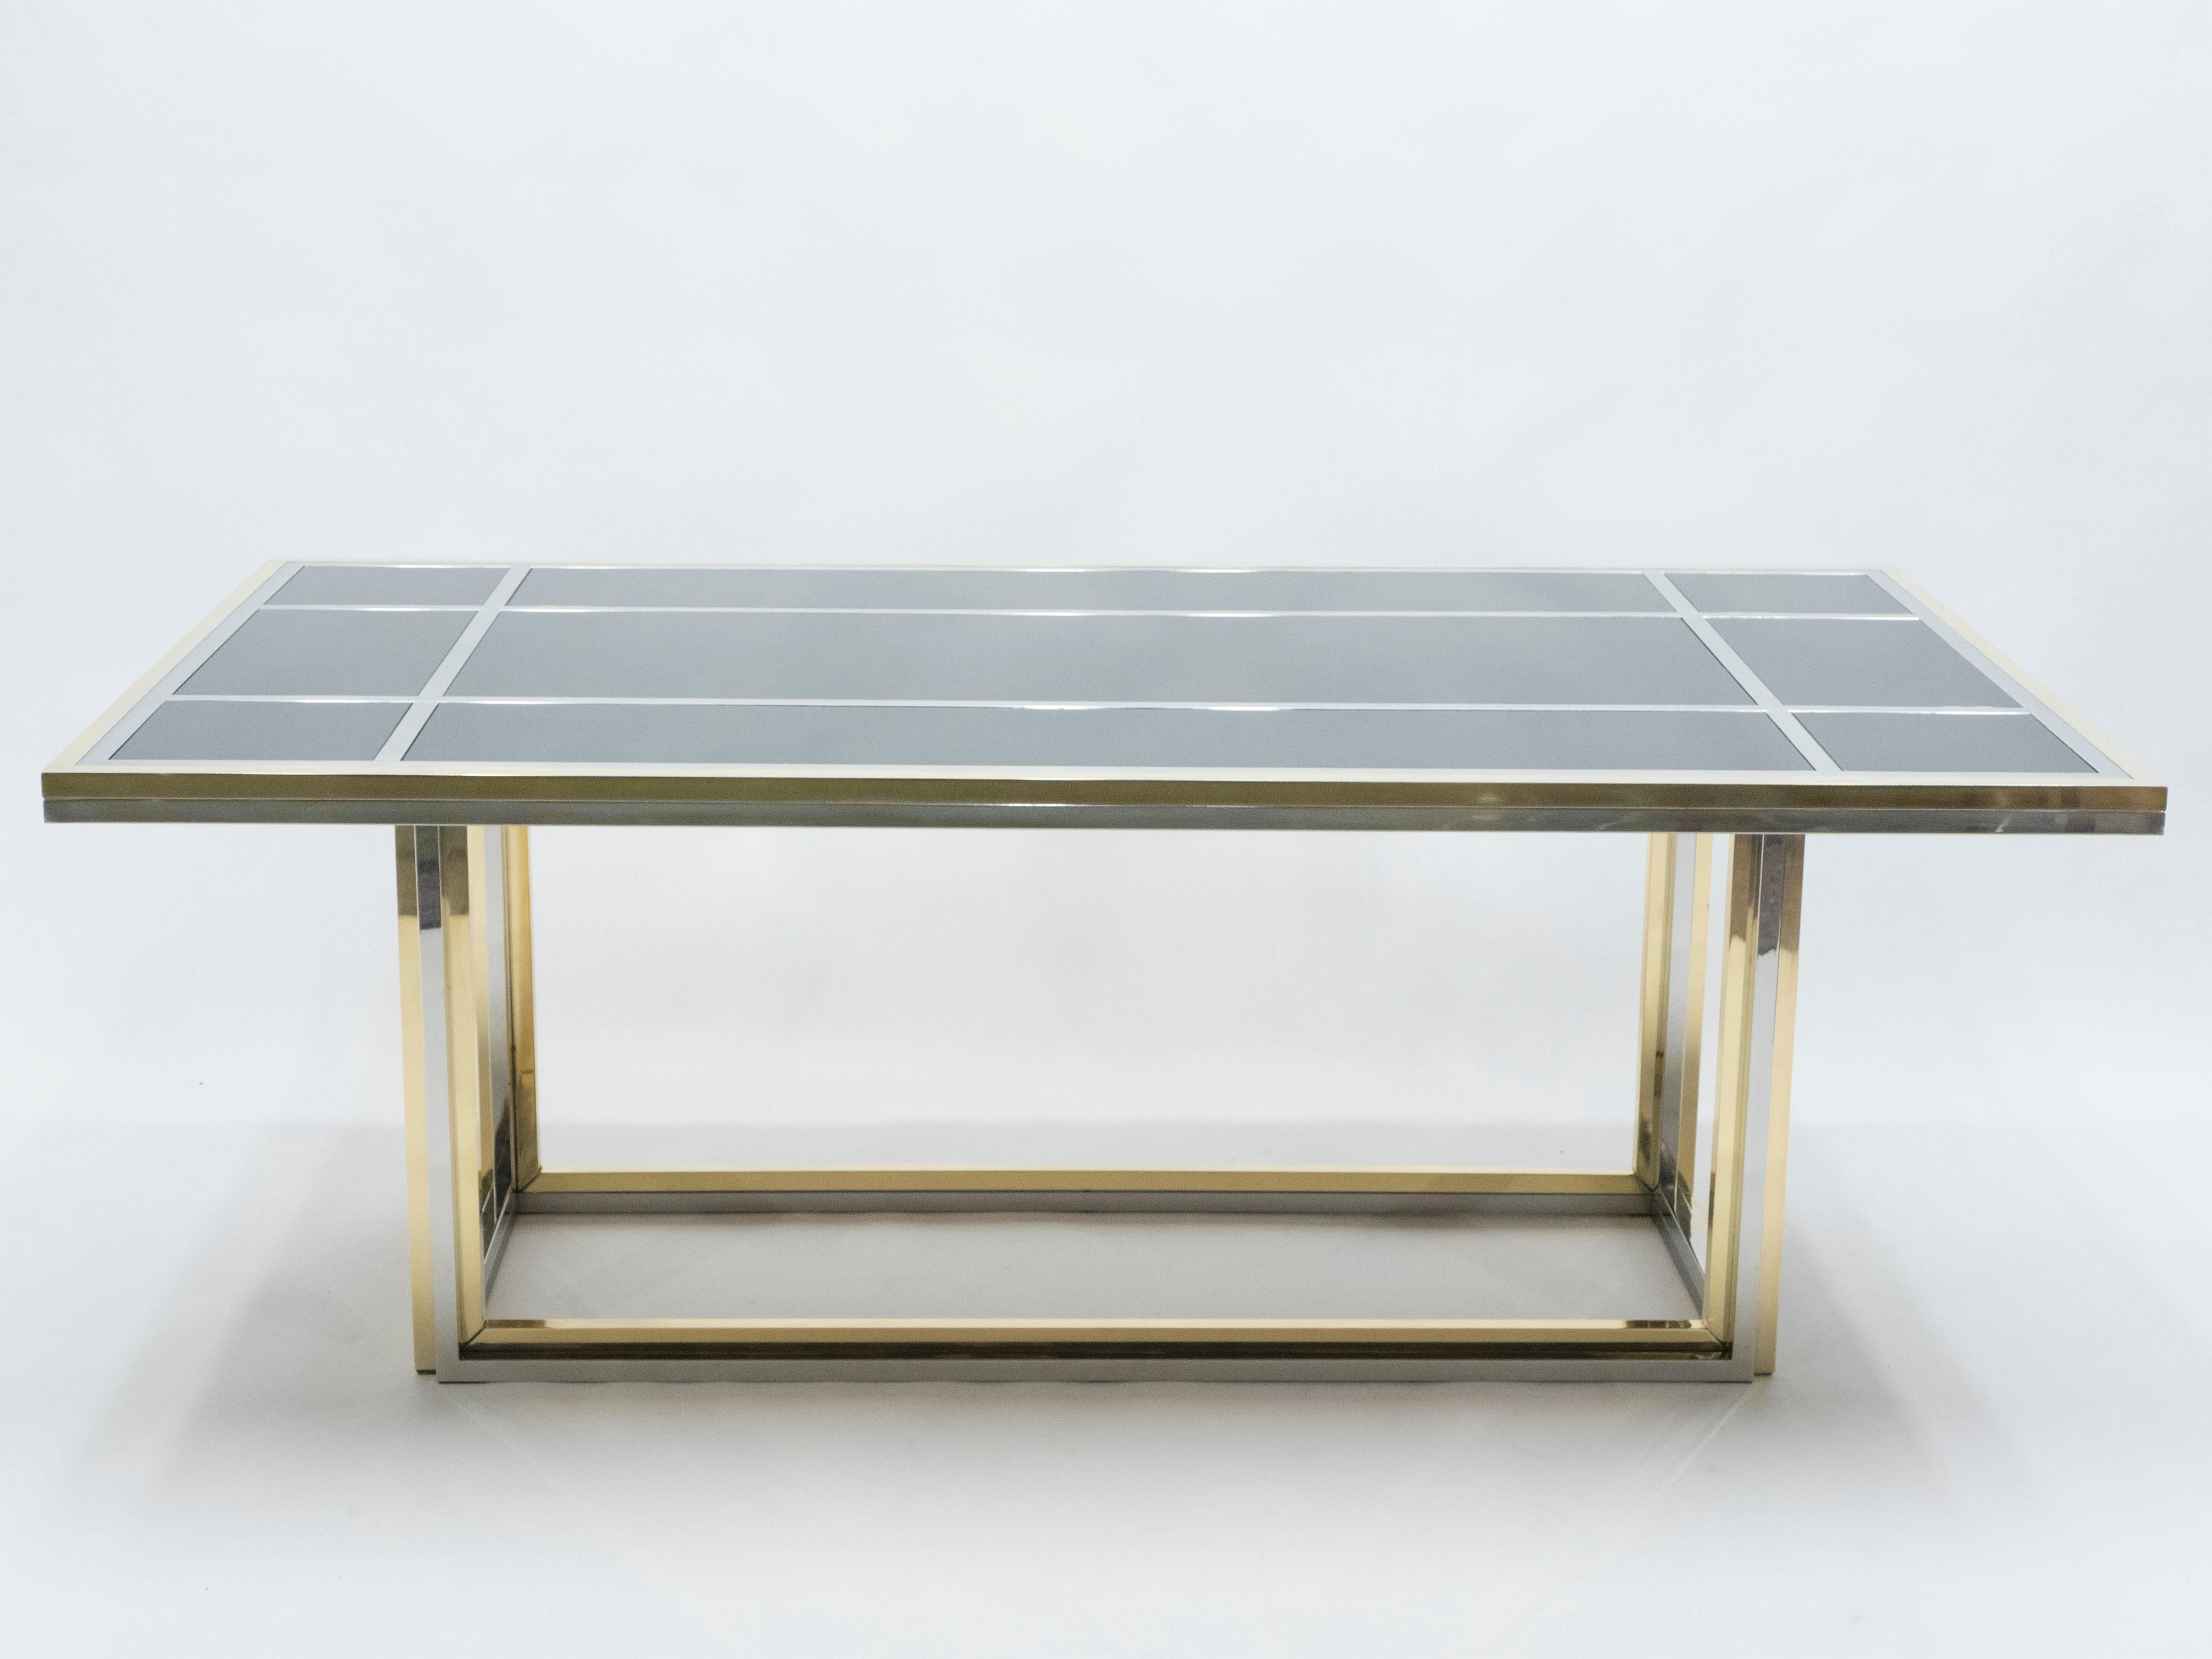 An intriguing piece of design, this large dining table deserves to be the focal point of your dining room. Symmetrical brass and chrome elements strike through a black opaline glass top, the result being an impressively sleek dining room